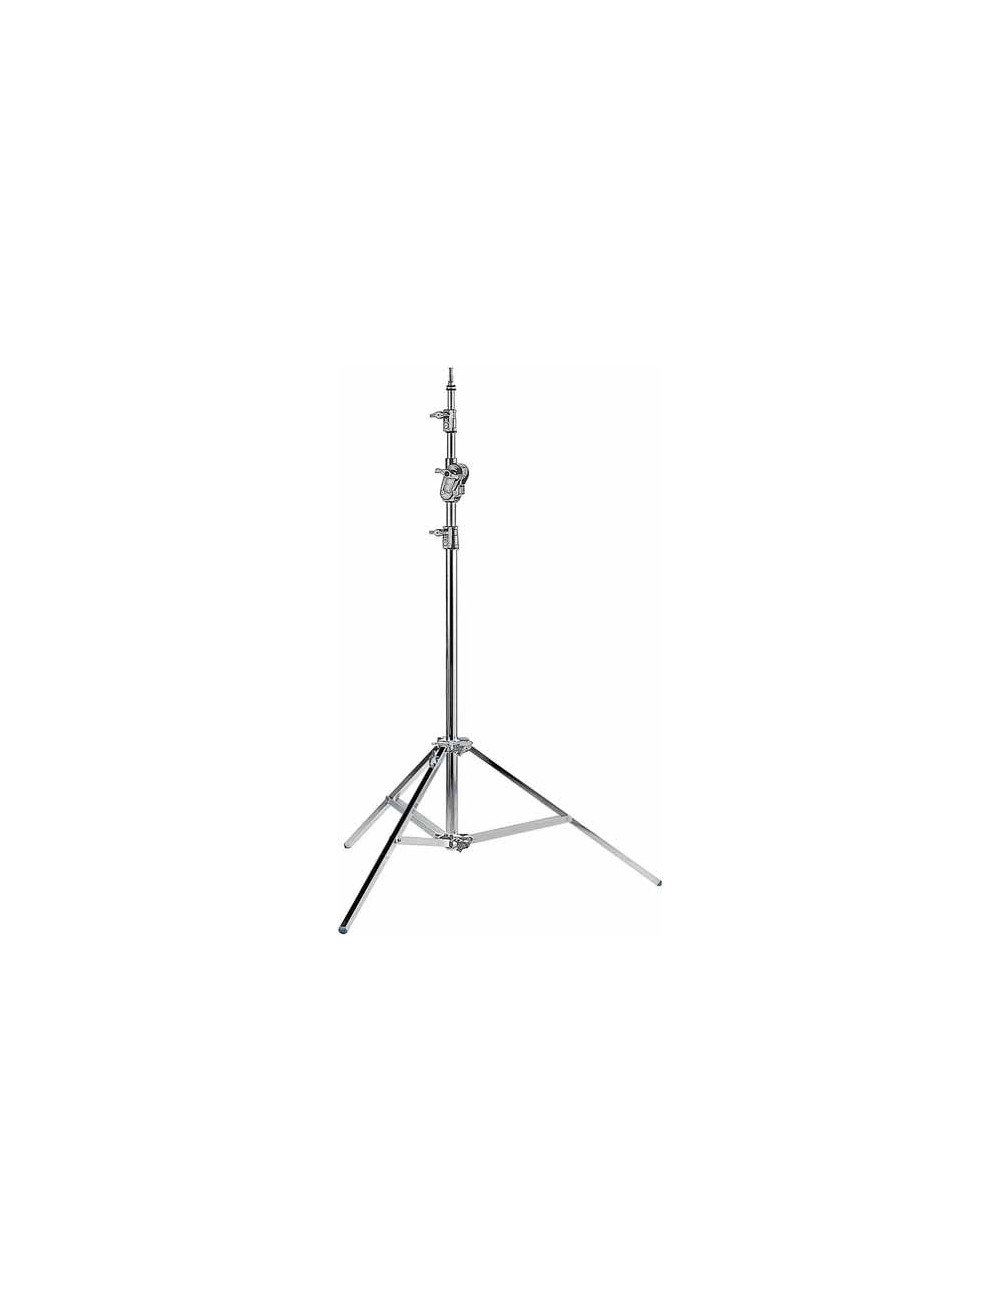 Baby Combi Boom Stand 39 Chrome Steel 390cm/153.6in Avenger - 
Steel light baby stand that easily converts to a boom stand
Level